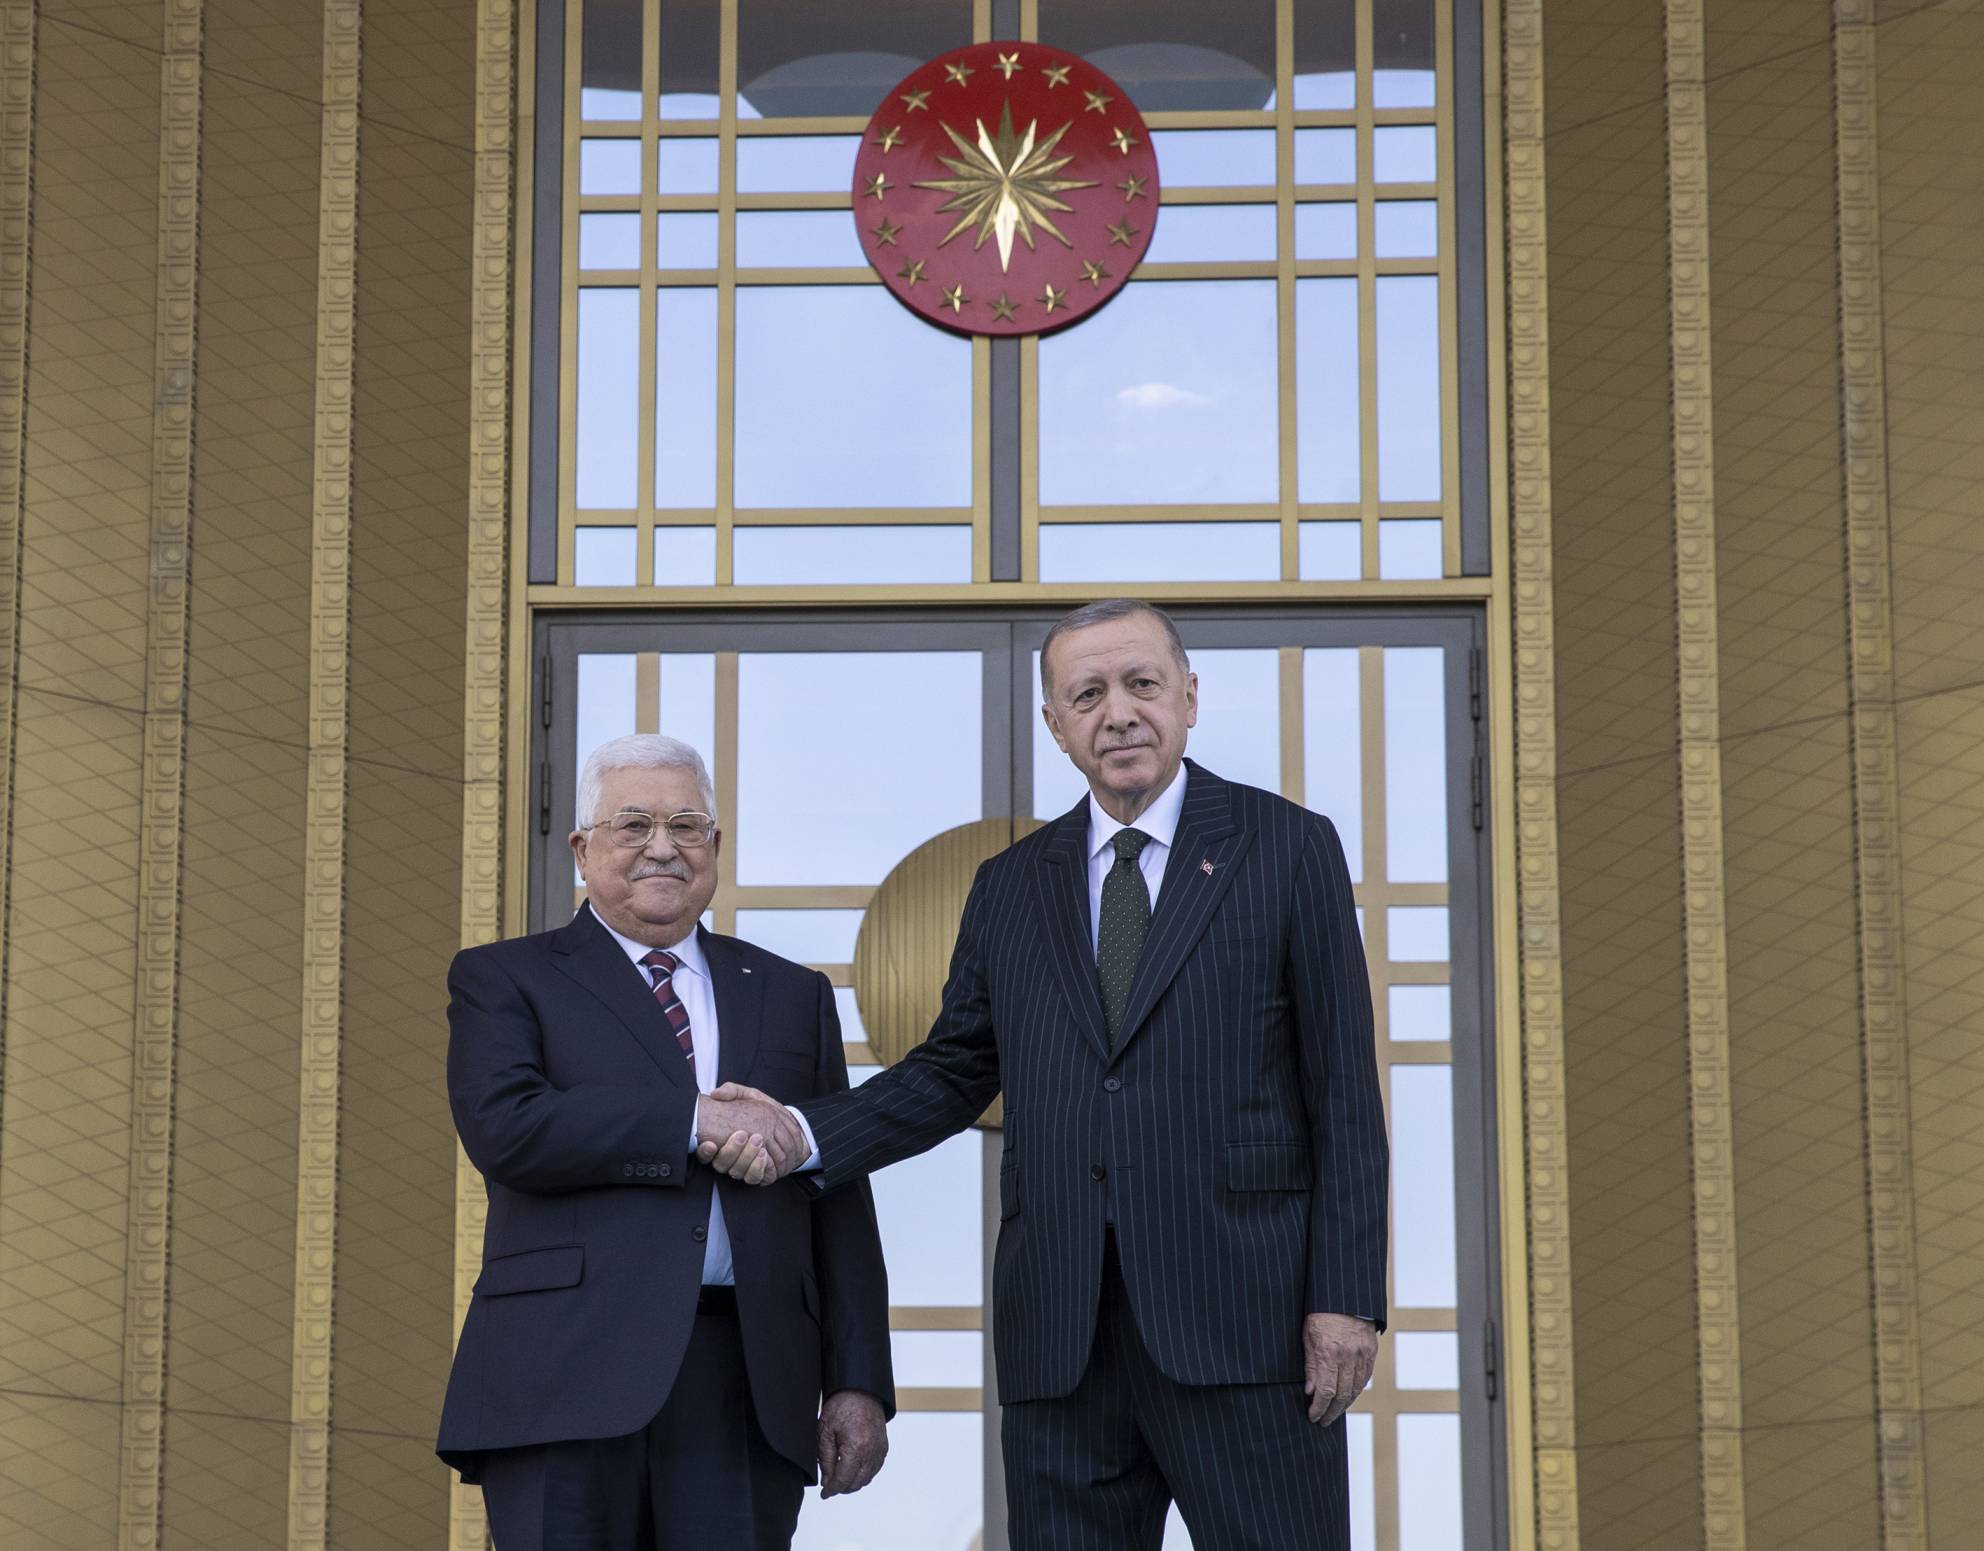 Erdogan with Palestinian President Mahmoud Abbas. Turkey shelters Hamas while getting closer to Israel. The Palestinian authorities have shown concern.